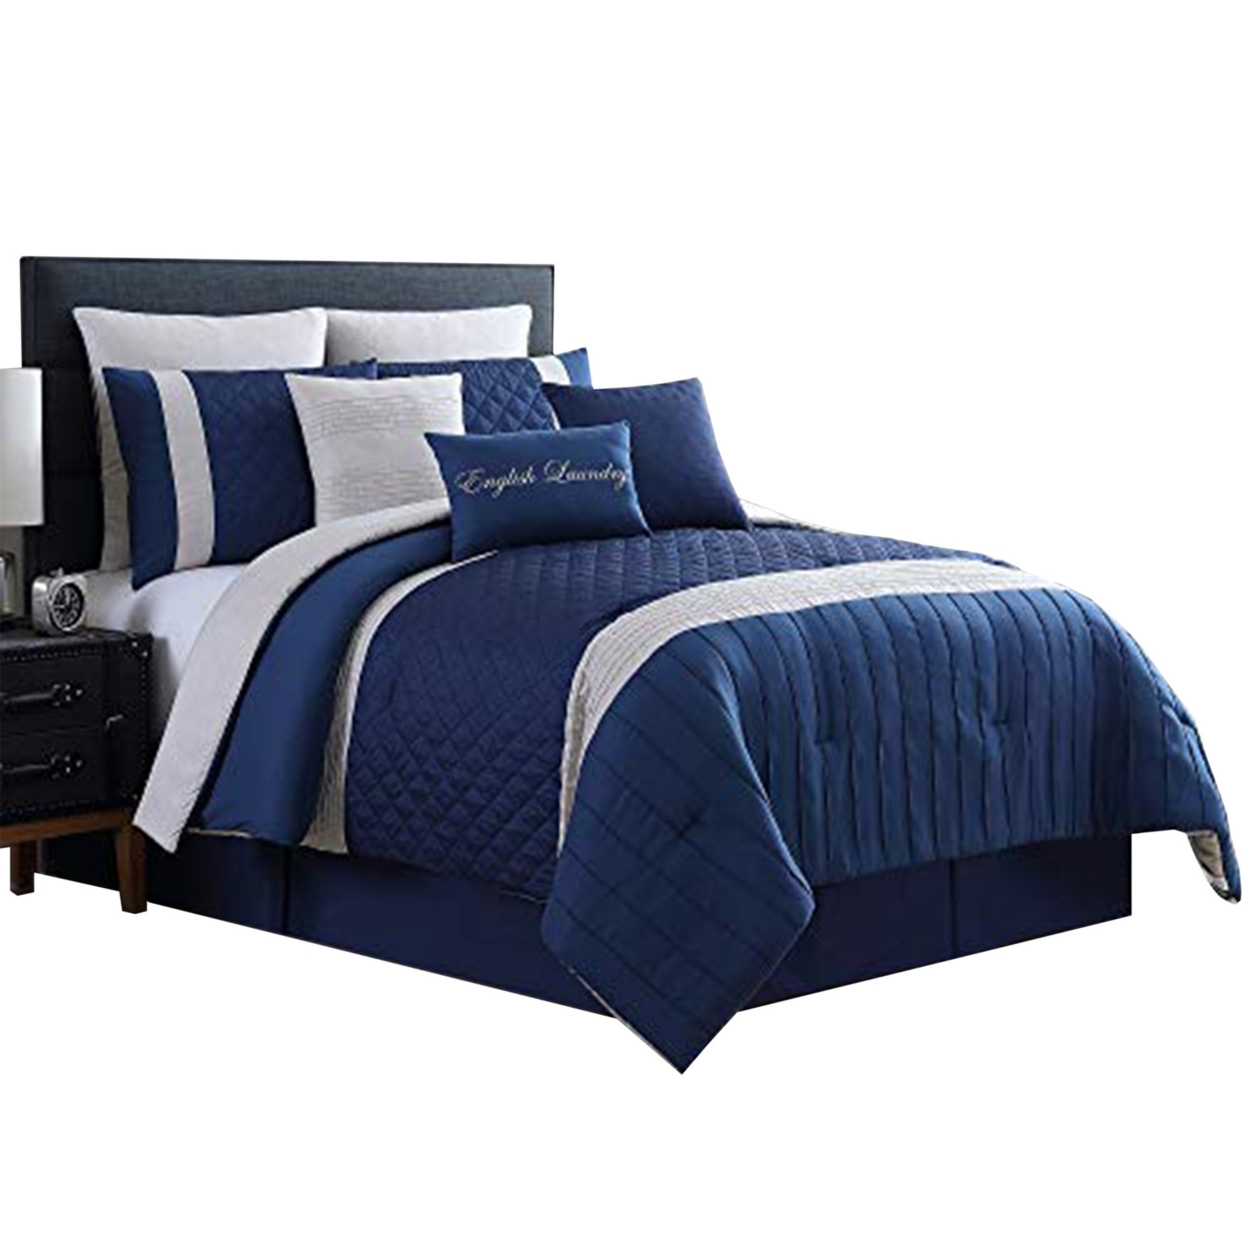 Basel Pleated Queen Comforter Set With Diamond Pattern The Urban Port, Blue And White- Saltoro Sherpi